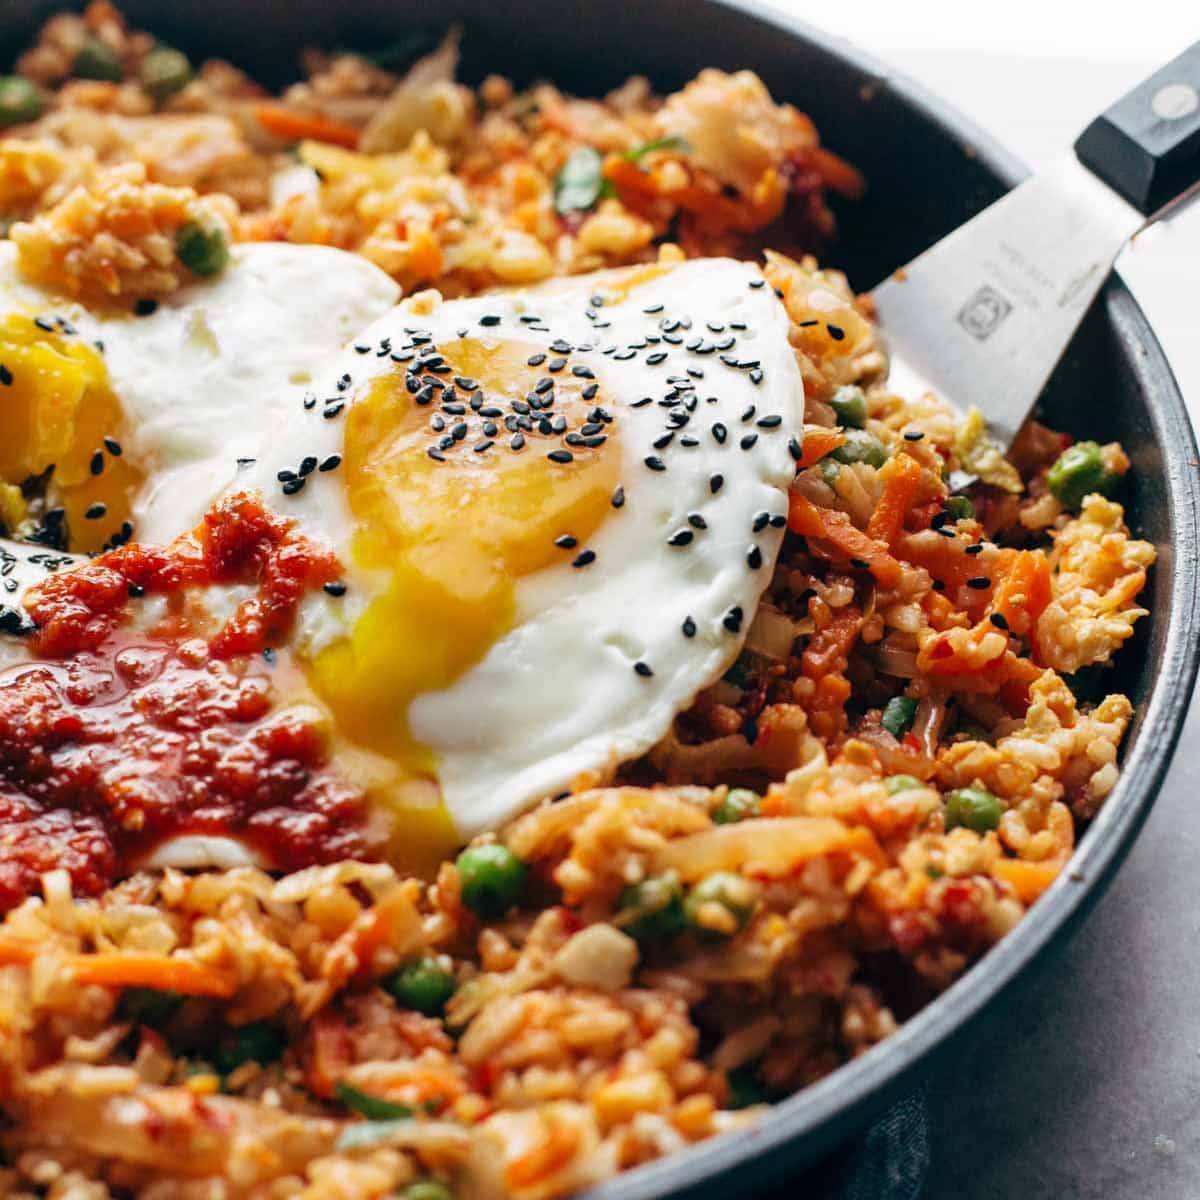 Kimchi Fried Rice in pan with runny egg yolk.